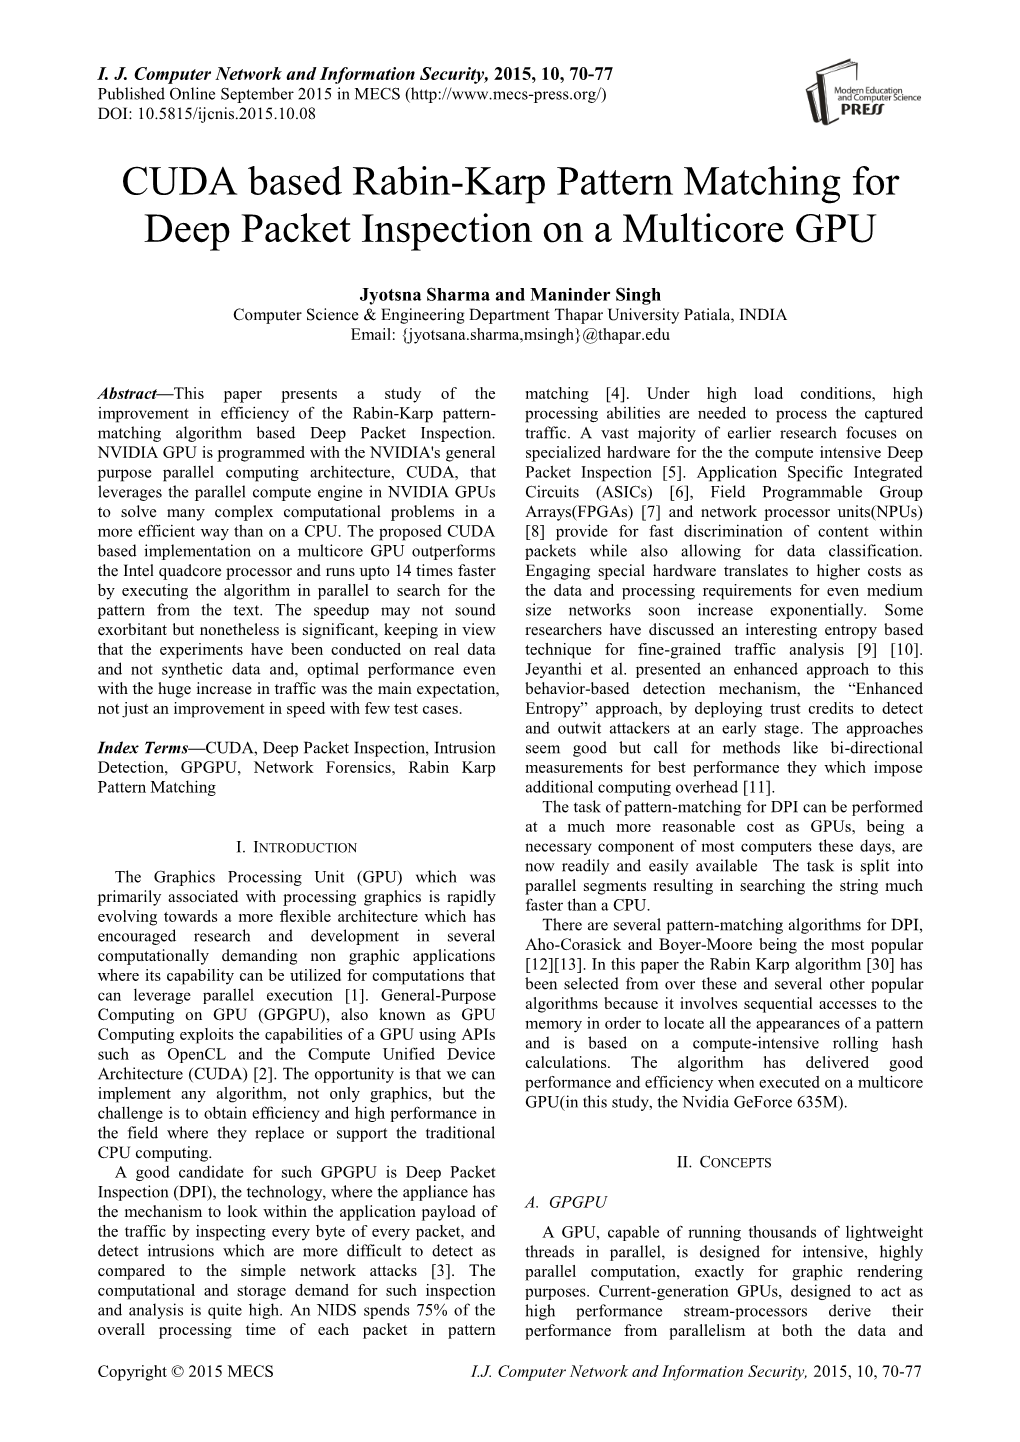 CUDA Based Rabin-Karp Pattern Matching for Deep Packet Inspection on a Multicore GPU